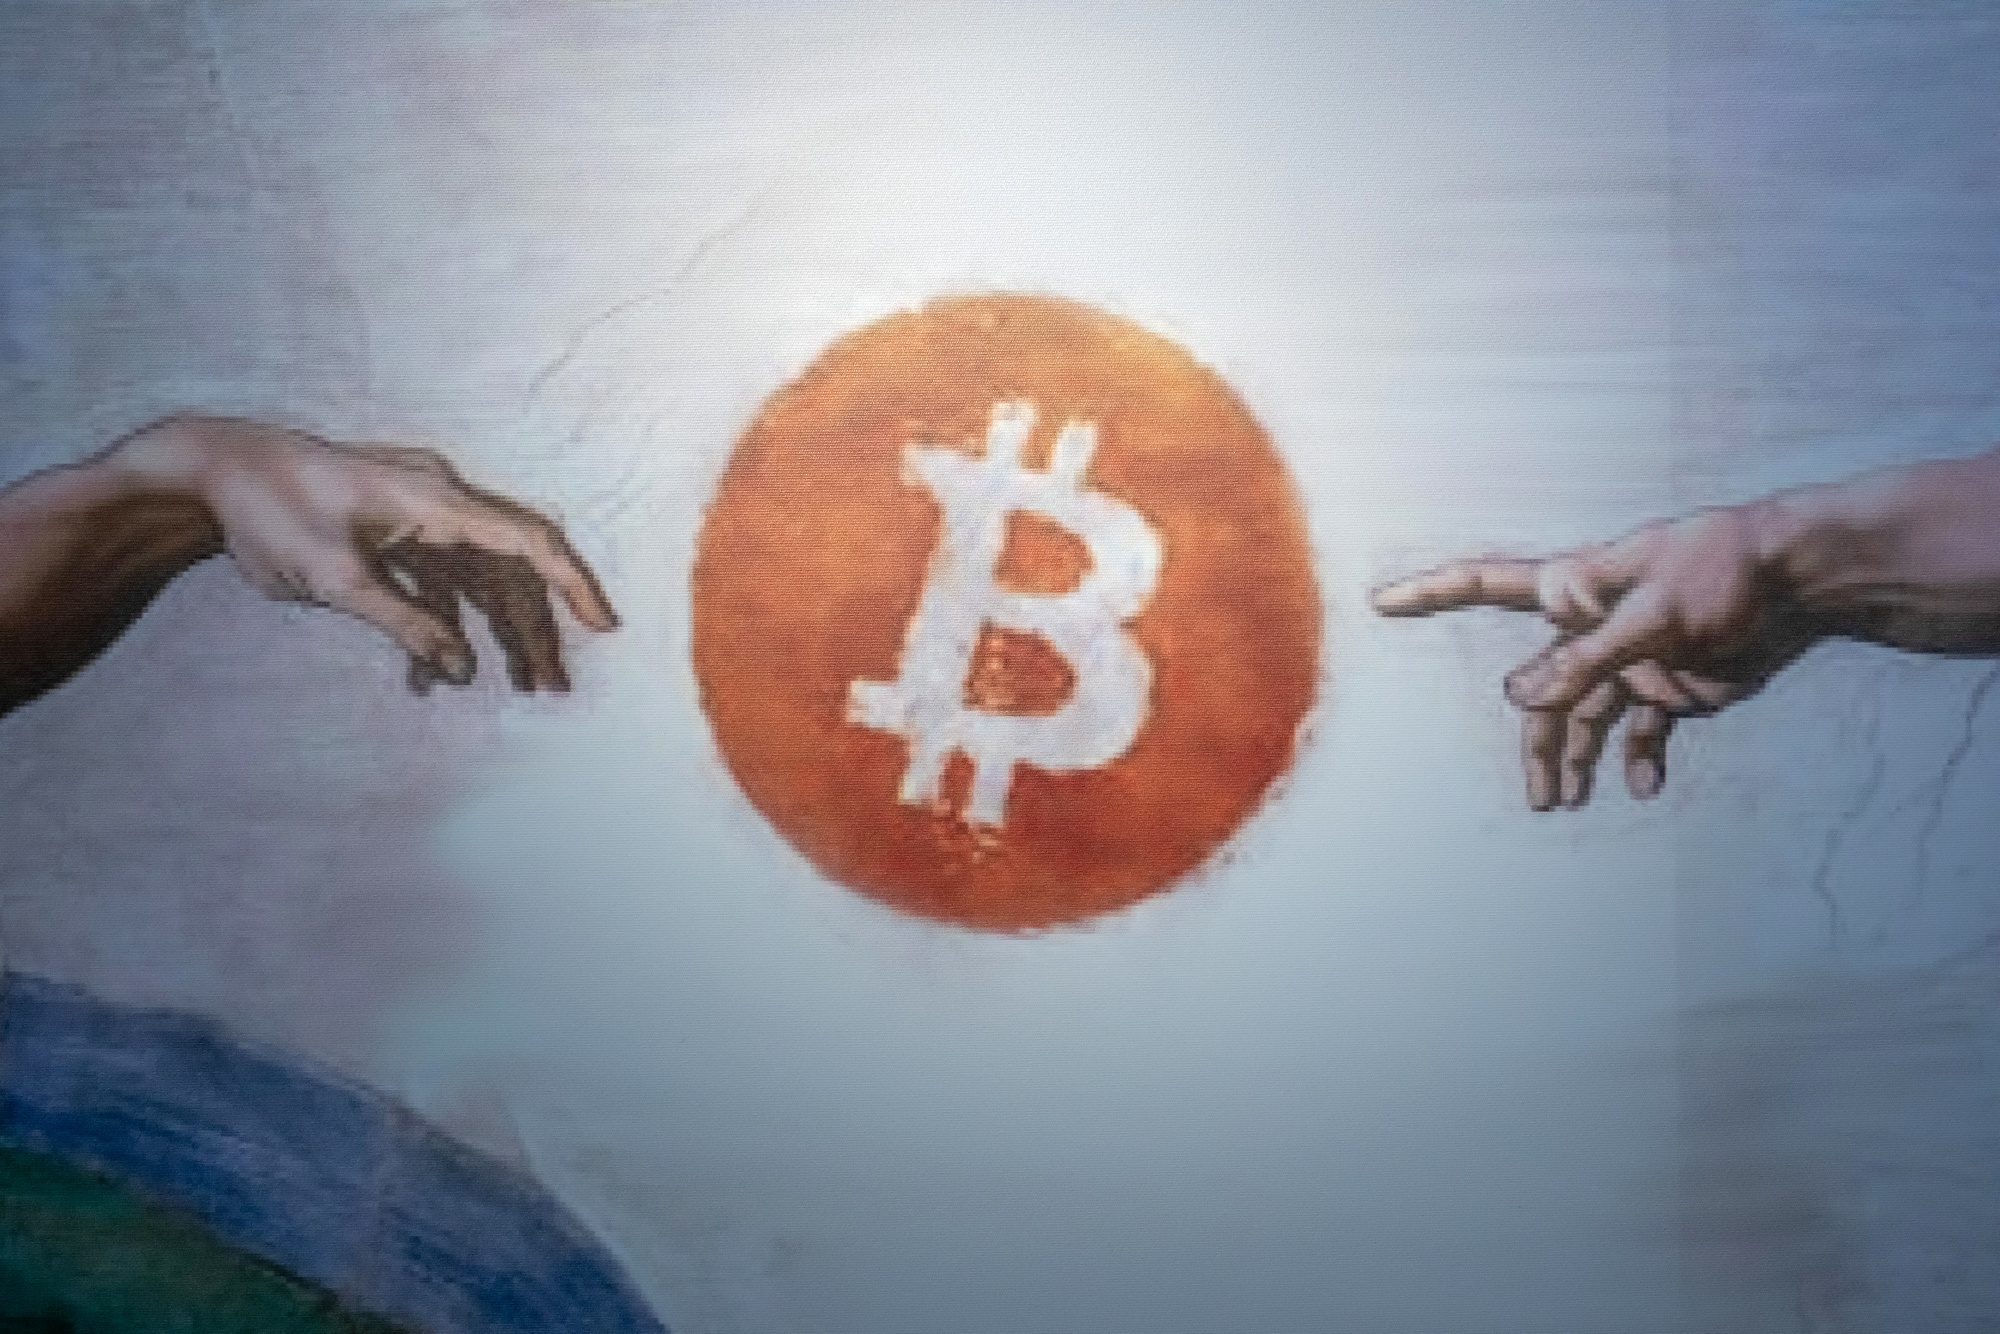 Bitcoin's bid to become the 'one chain to rule them all